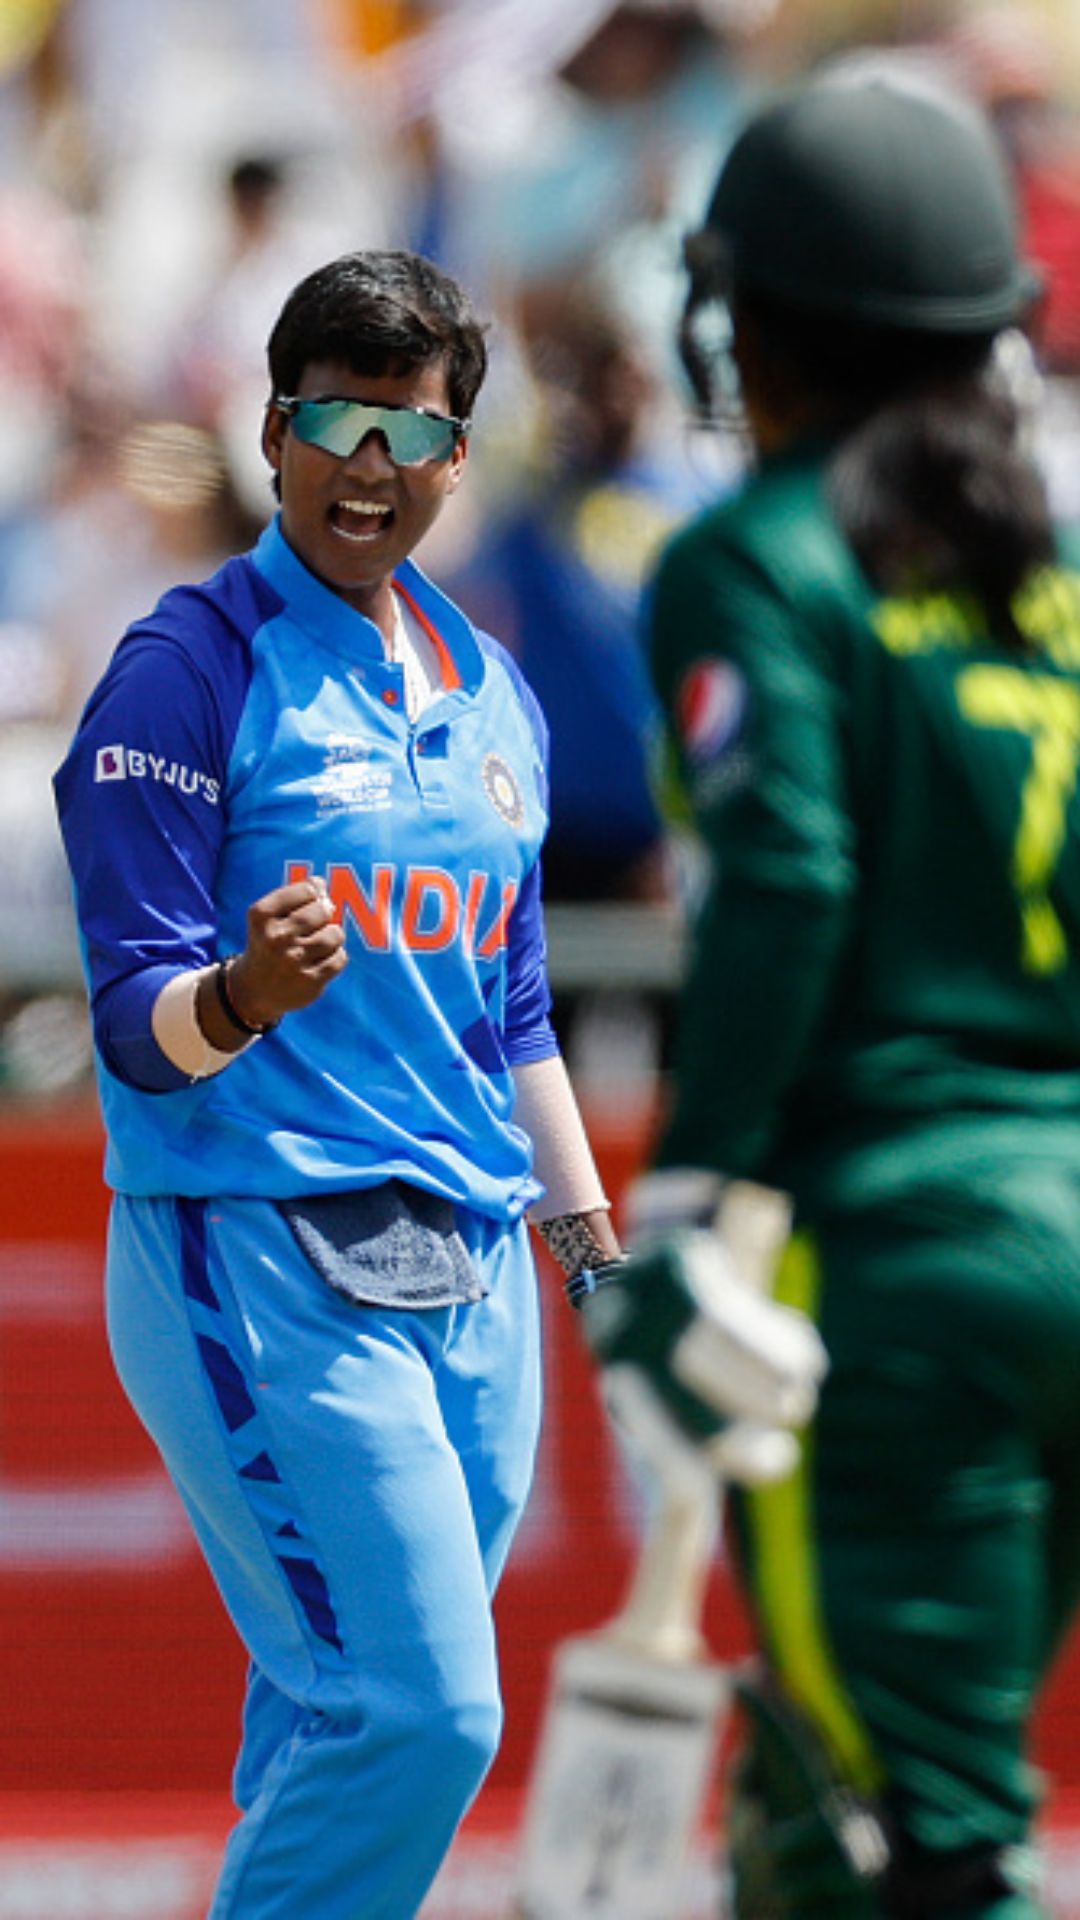 A look at Most T20 Wickets in Women's cricket featuring Pakistan's Nida Dar and India's Deepti Sharma